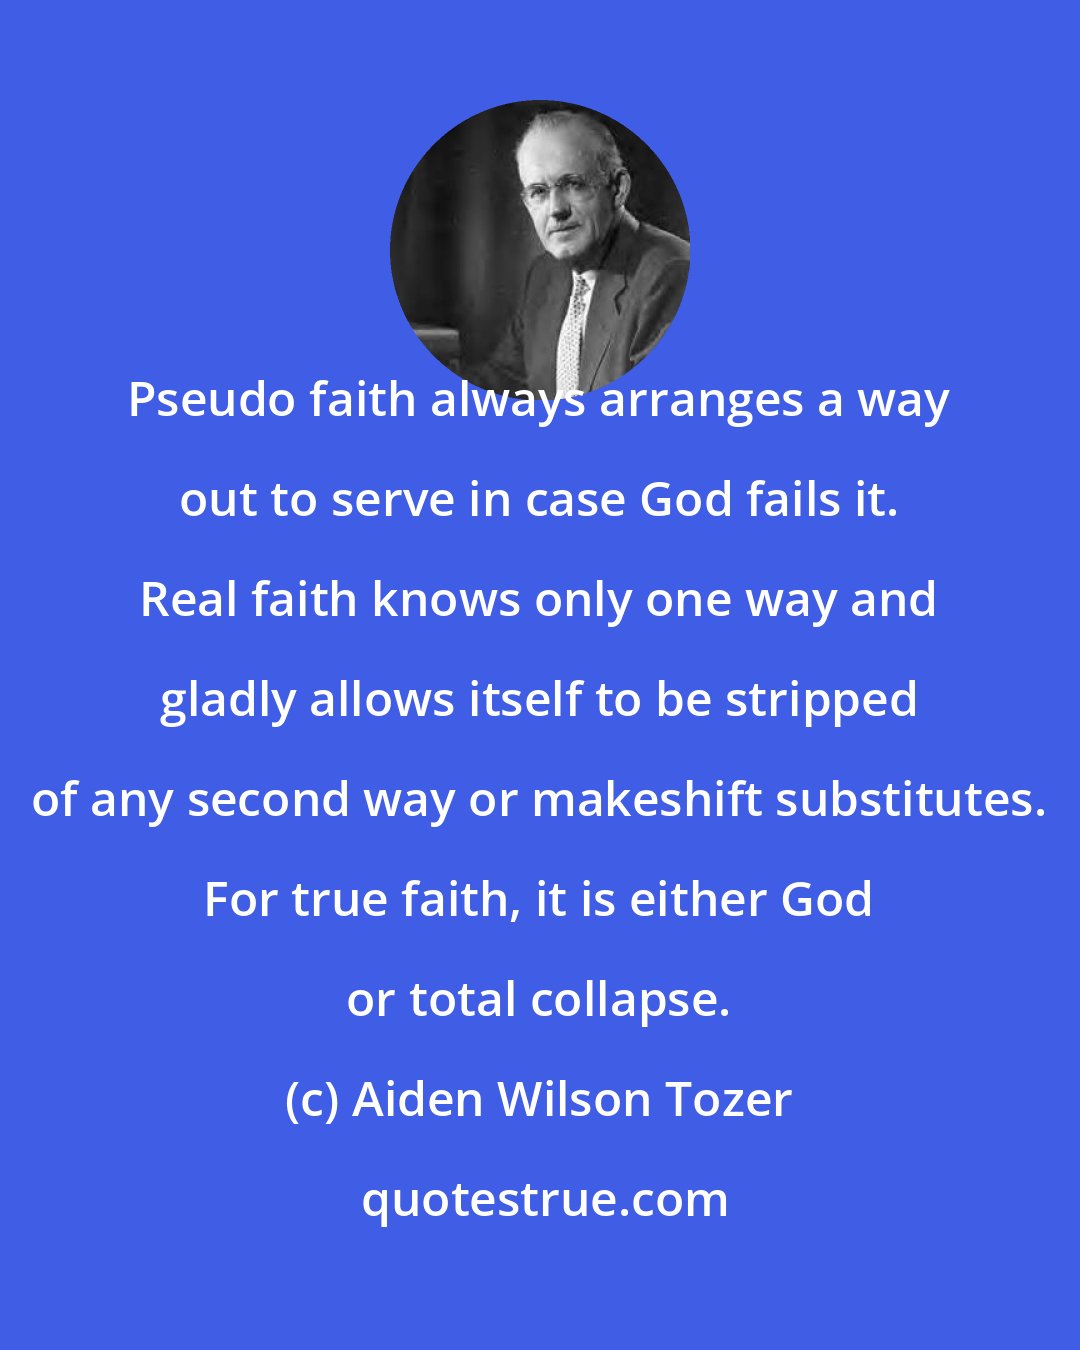 Aiden Wilson Tozer: Pseudo faith always arranges a way out to serve in case God fails it. Real faith knows only one way and gladly allows itself to be stripped of any second way or makeshift substitutes. For true faith, it is either God or total collapse.